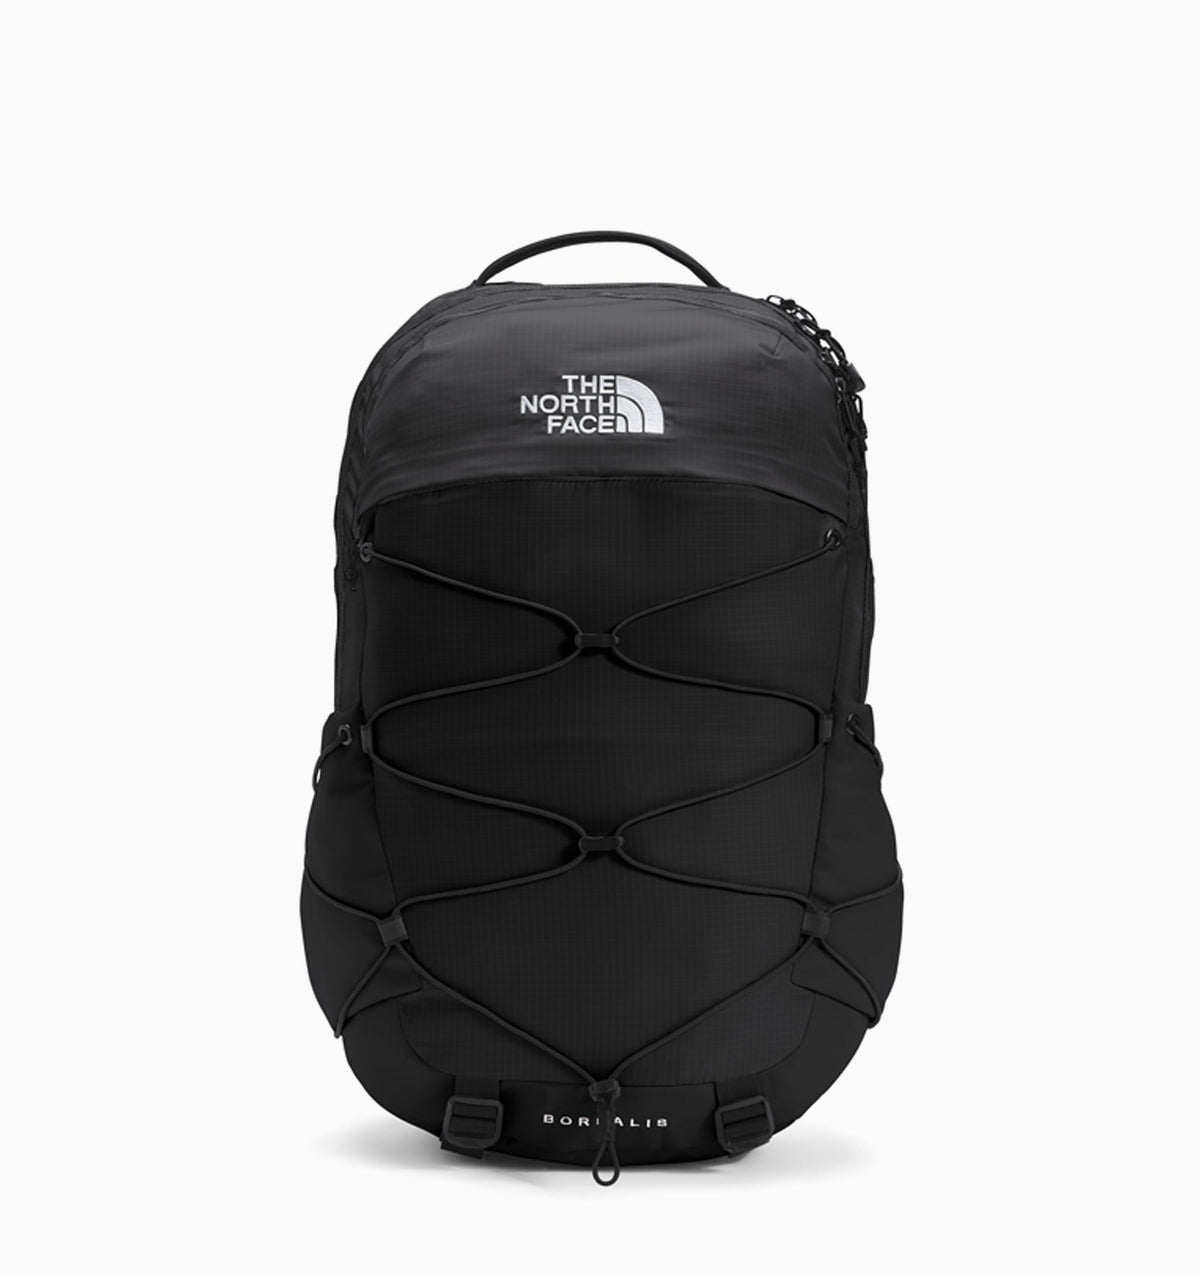 The North Face Borealis 16" Laptop Backpack 28L 2021 - Black